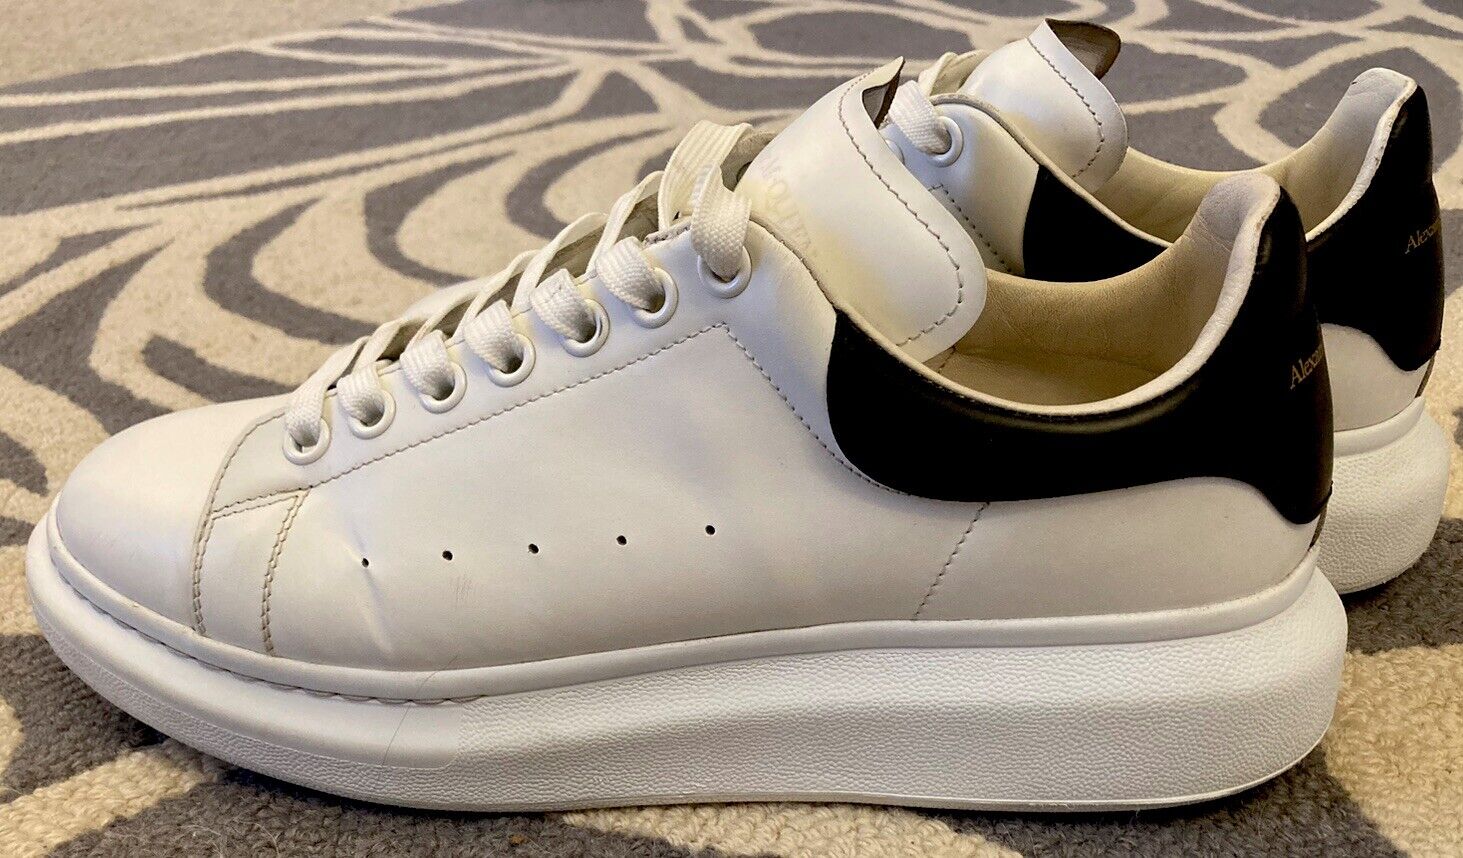 Alexander McQueen Designer Sneakers Size 11 White/Black Lightly Used Without Box